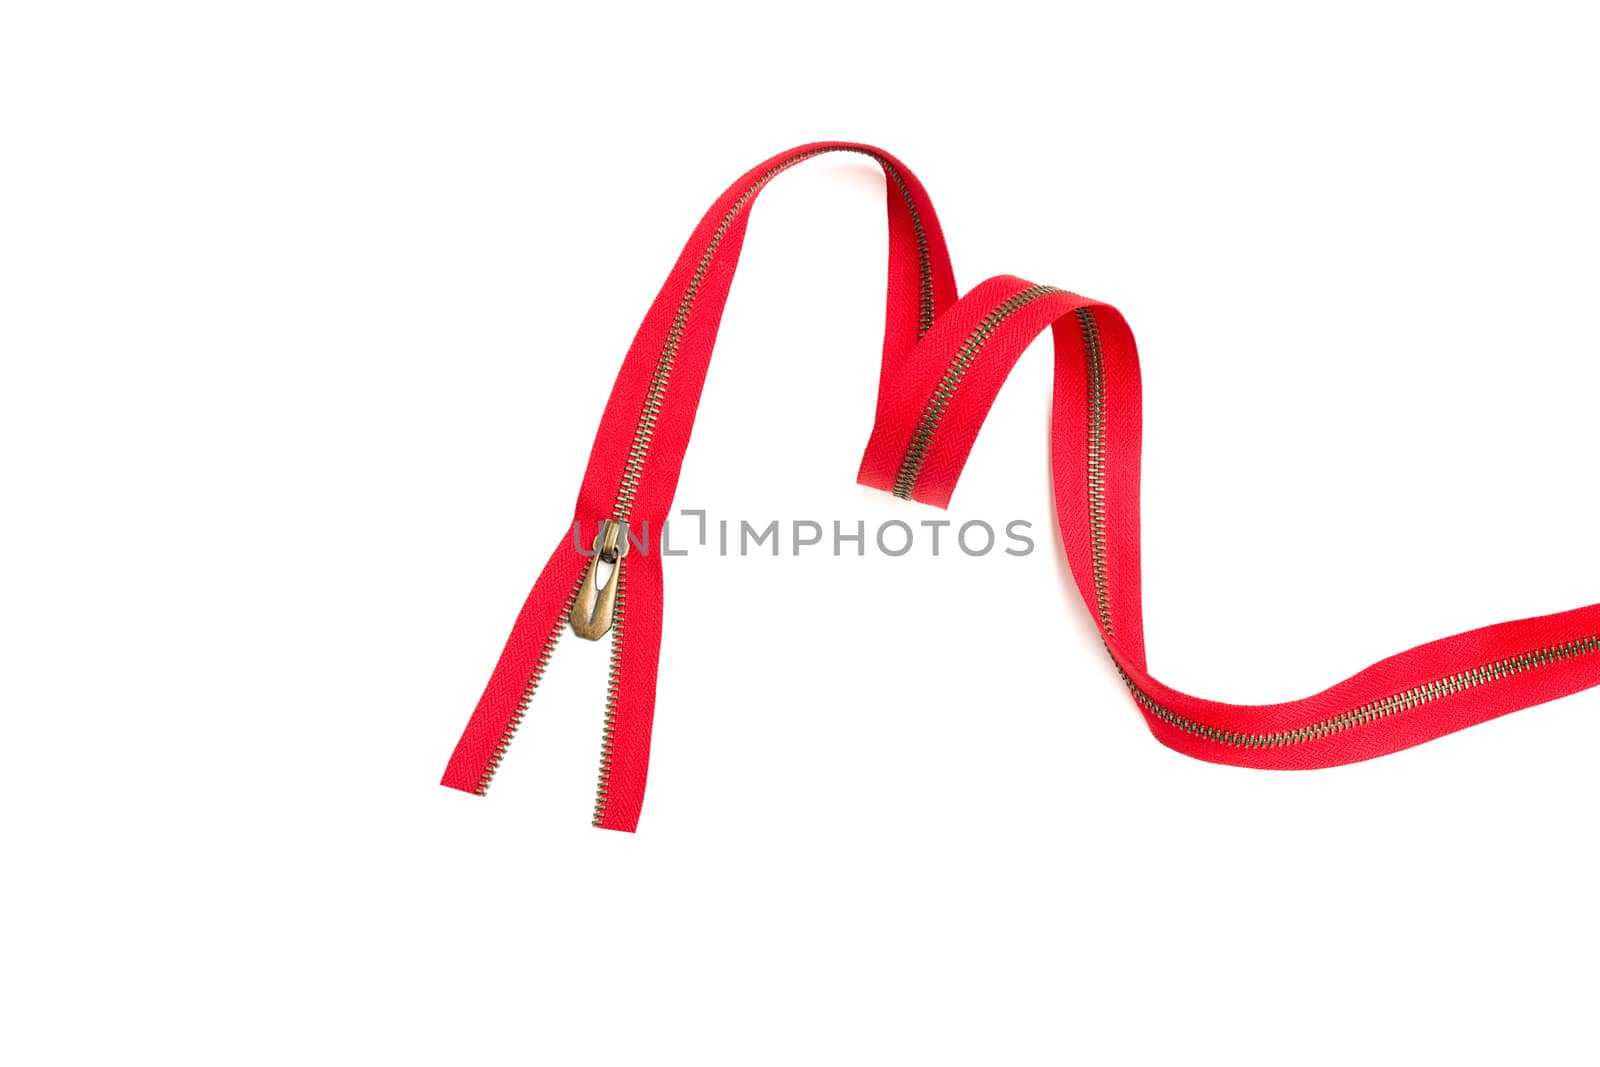 Clothes red zipper closed positions. Zipper like clothing mouth concept. Zippers isolated on white background.